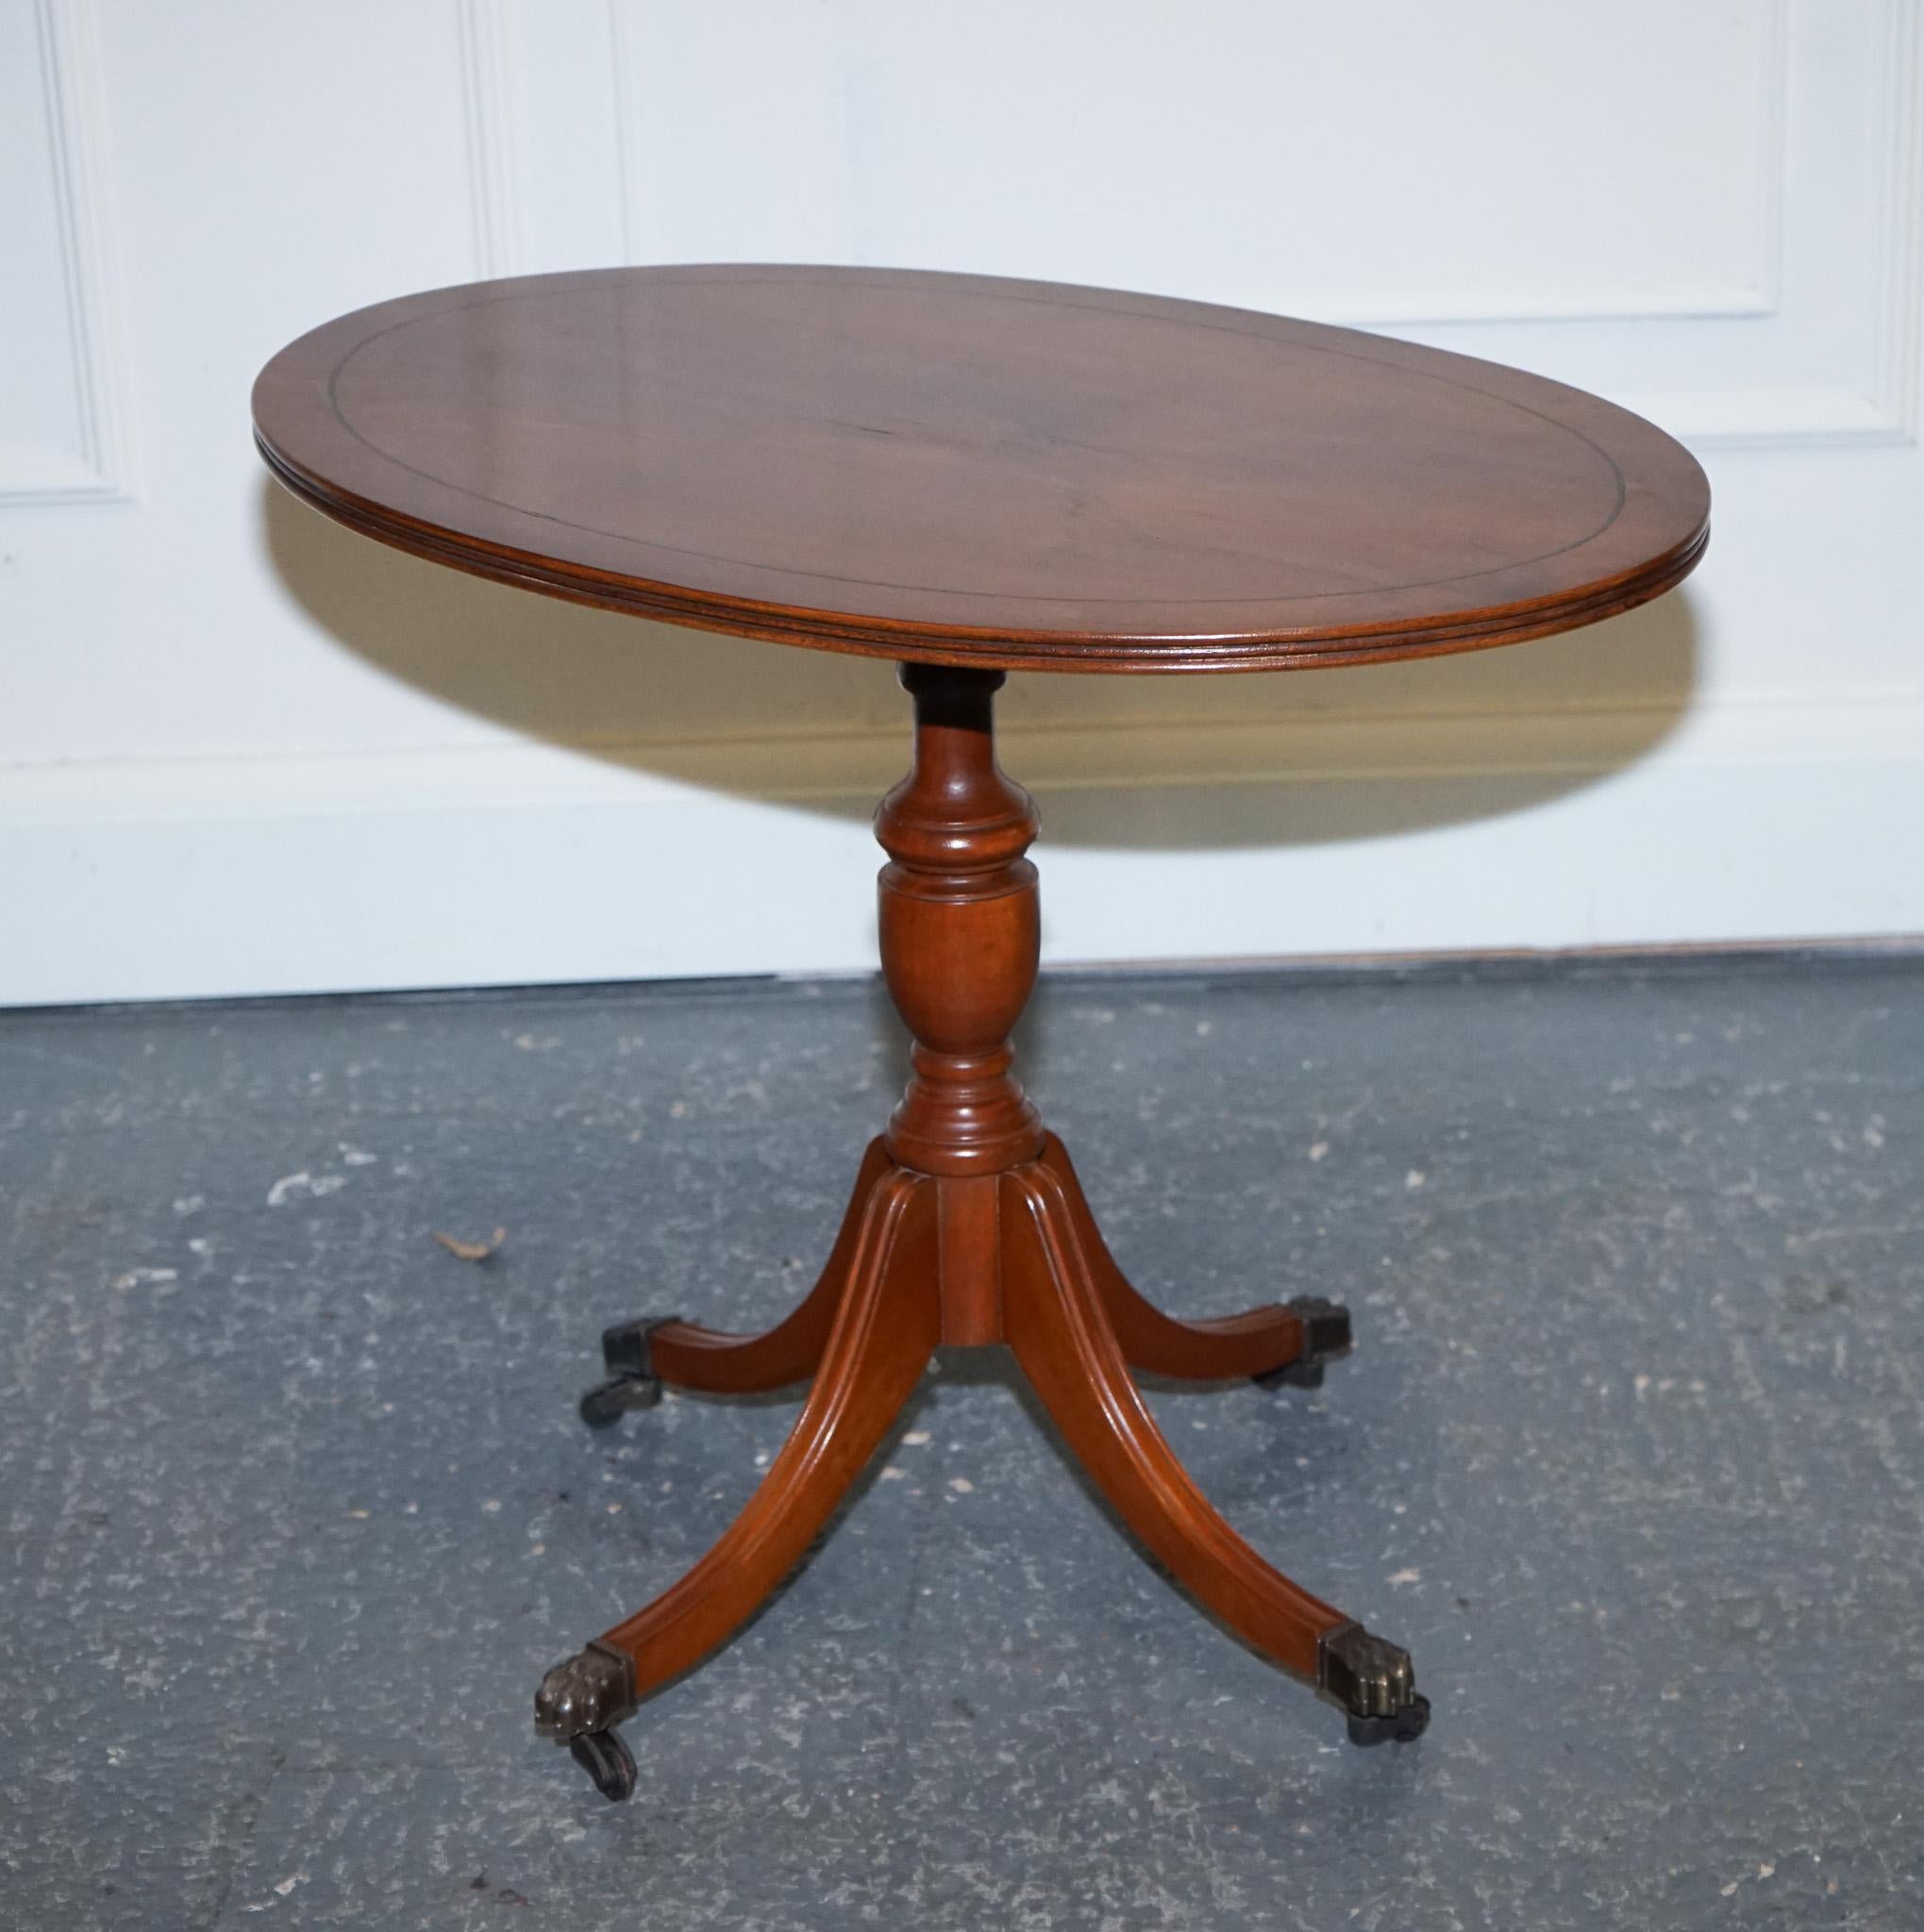 Hand-Crafted LOVELY VINTAGE OVAL BURR YEW WOOD SIDE TABLE ON TRiPOD LEGS For Sale